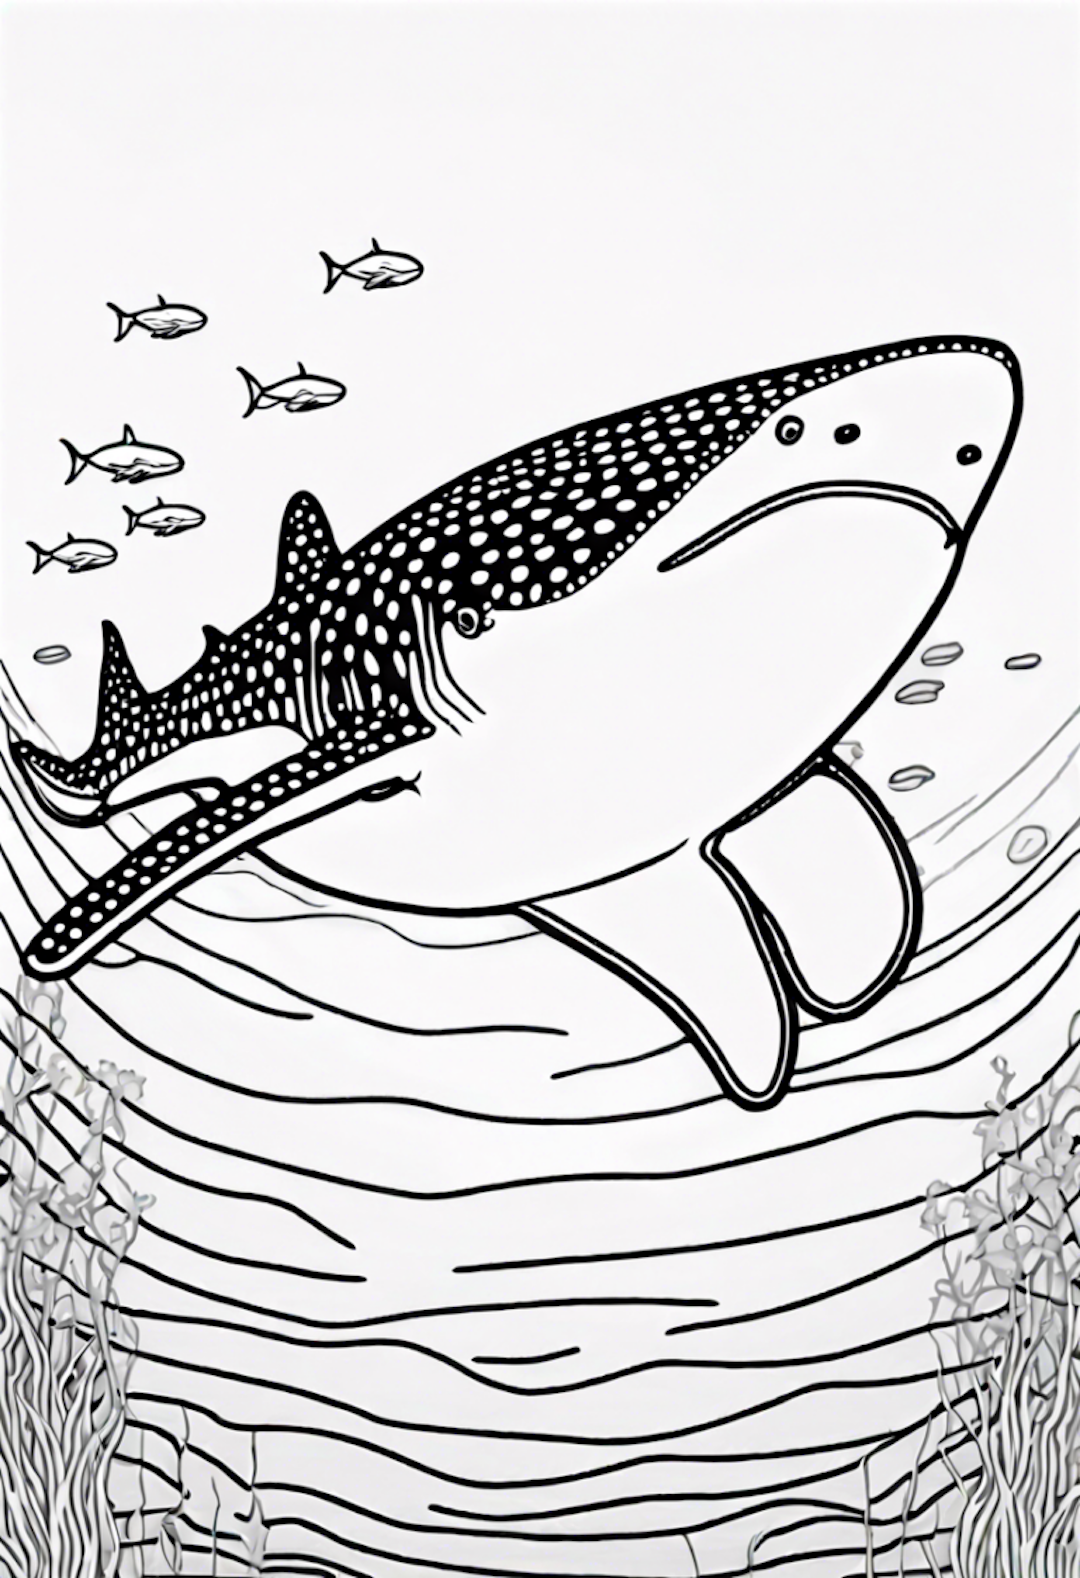 Whale Shark coloring pages